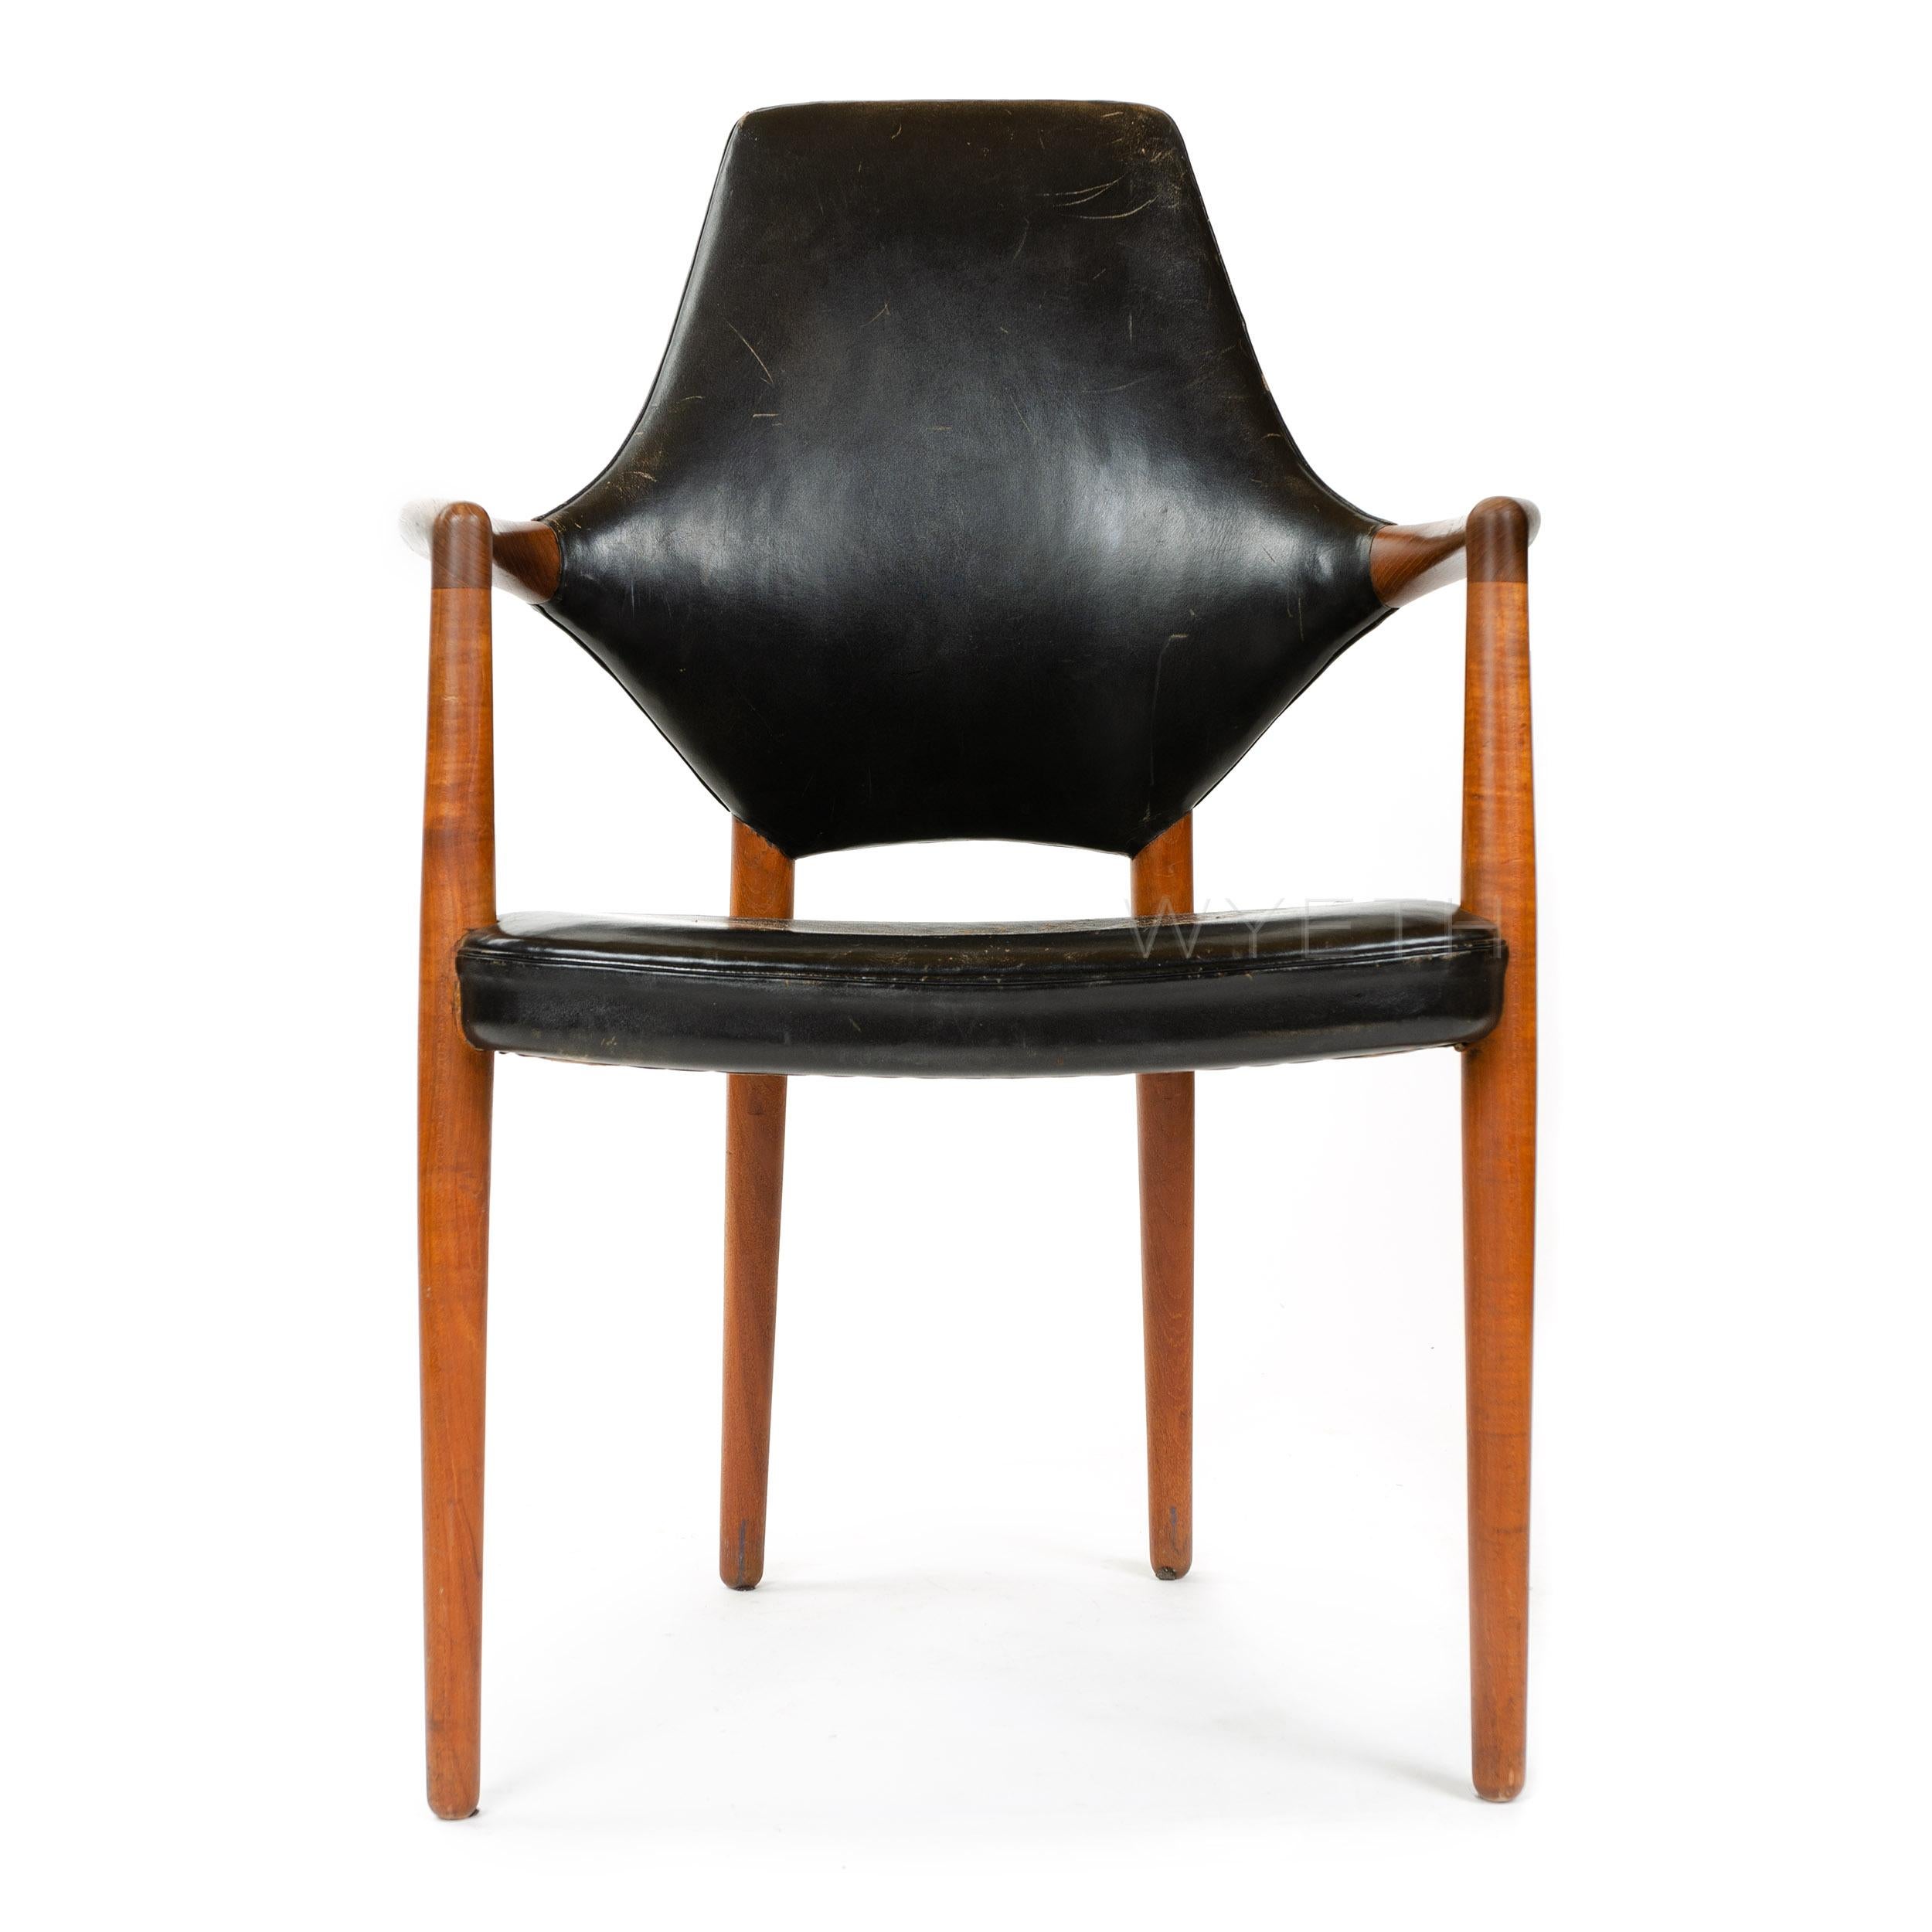 A Scandinavian Modern armchair designed by Helge Vestergaard Jensen. This high back chair features a dynamically shaped back, solid teak wood frame, and is upholstered with black leather. Chair is in original condition with lovely patinated leather.